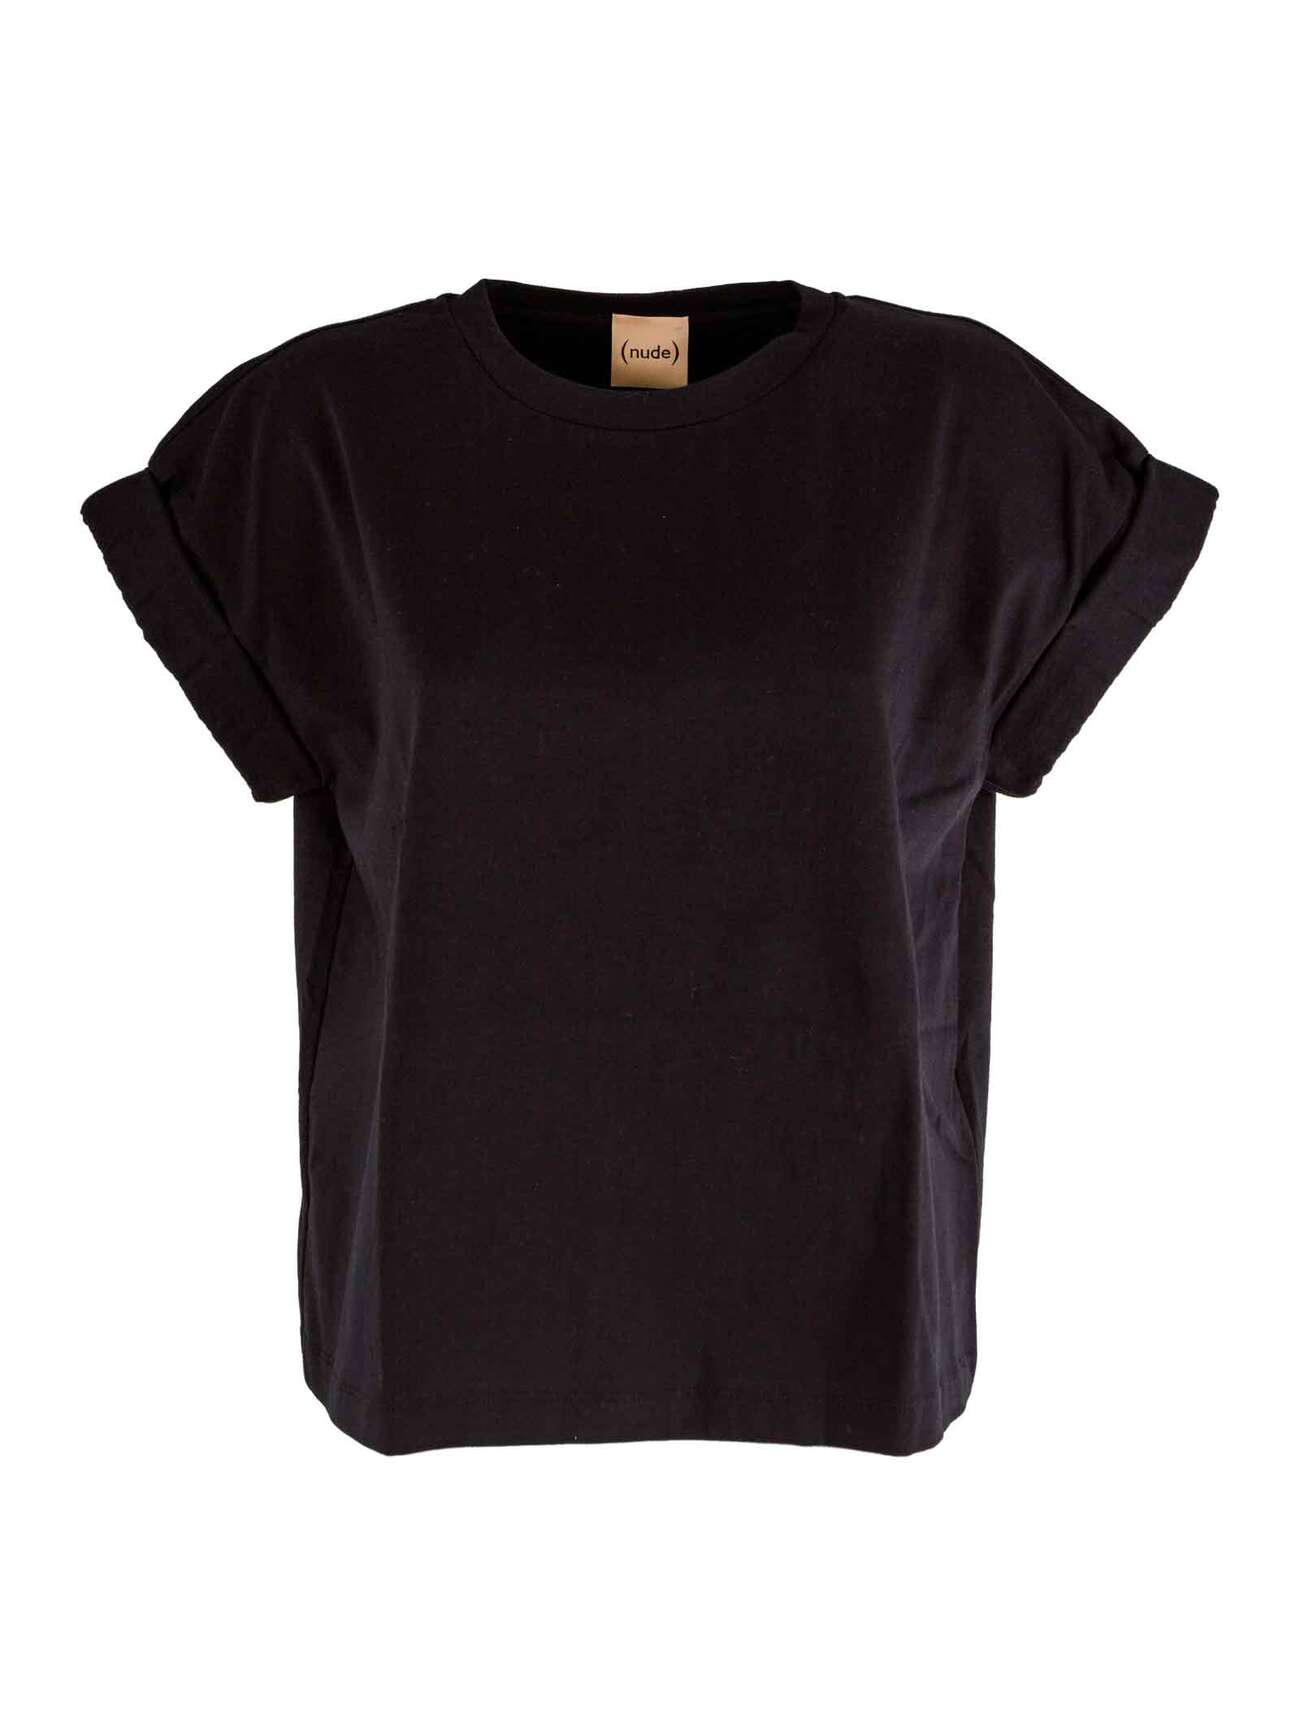 (nude) Cotton T-shirt in black